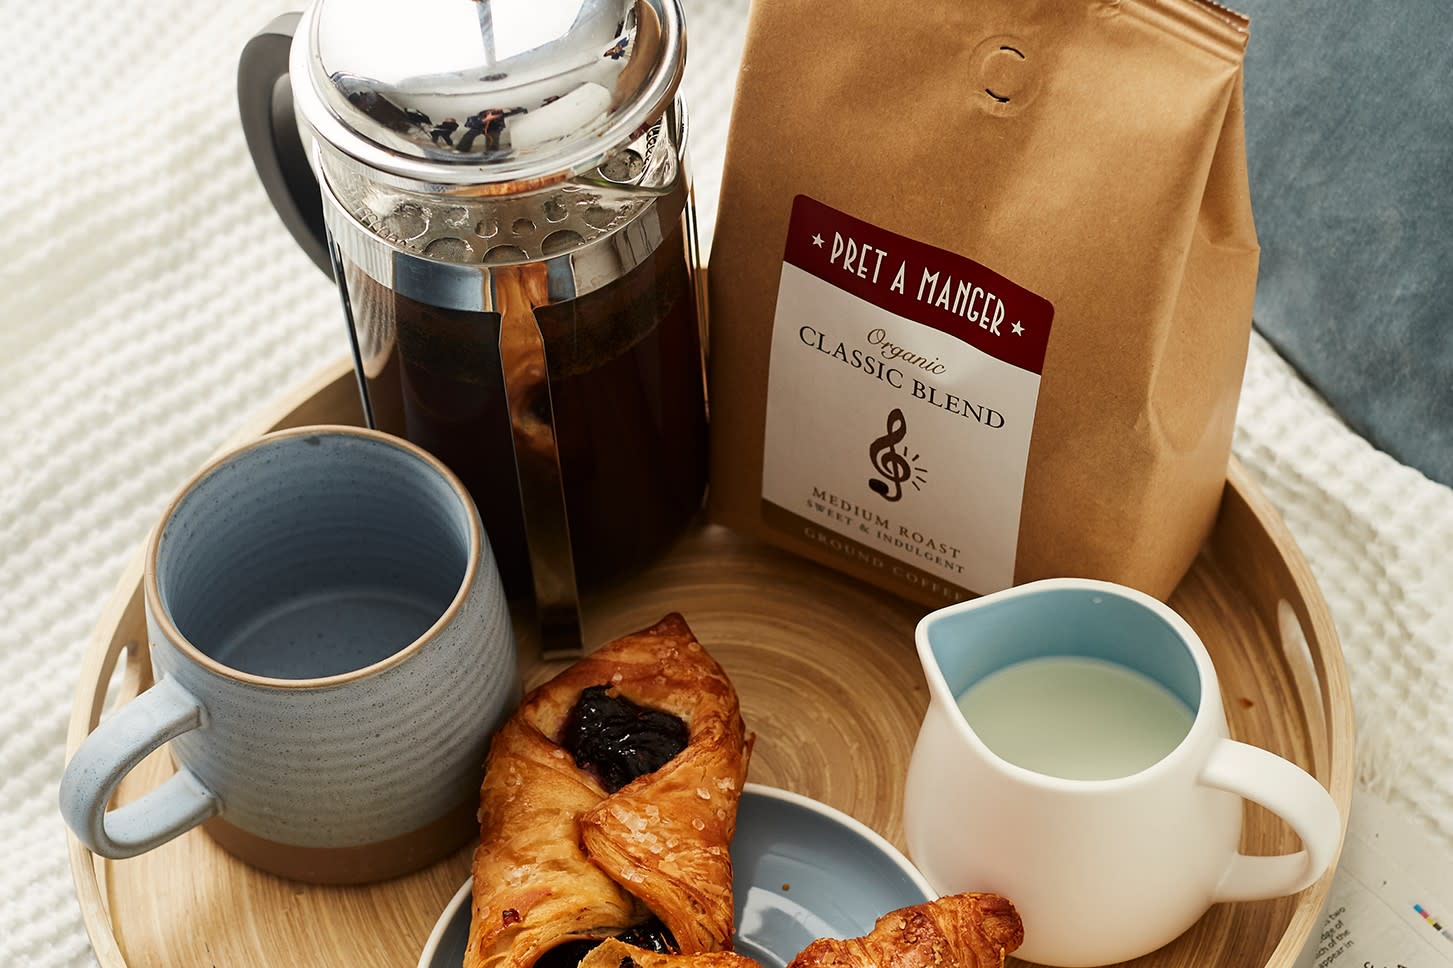 What Coffee Can I Buy At Home That Tastes Like Pret Coffee? 